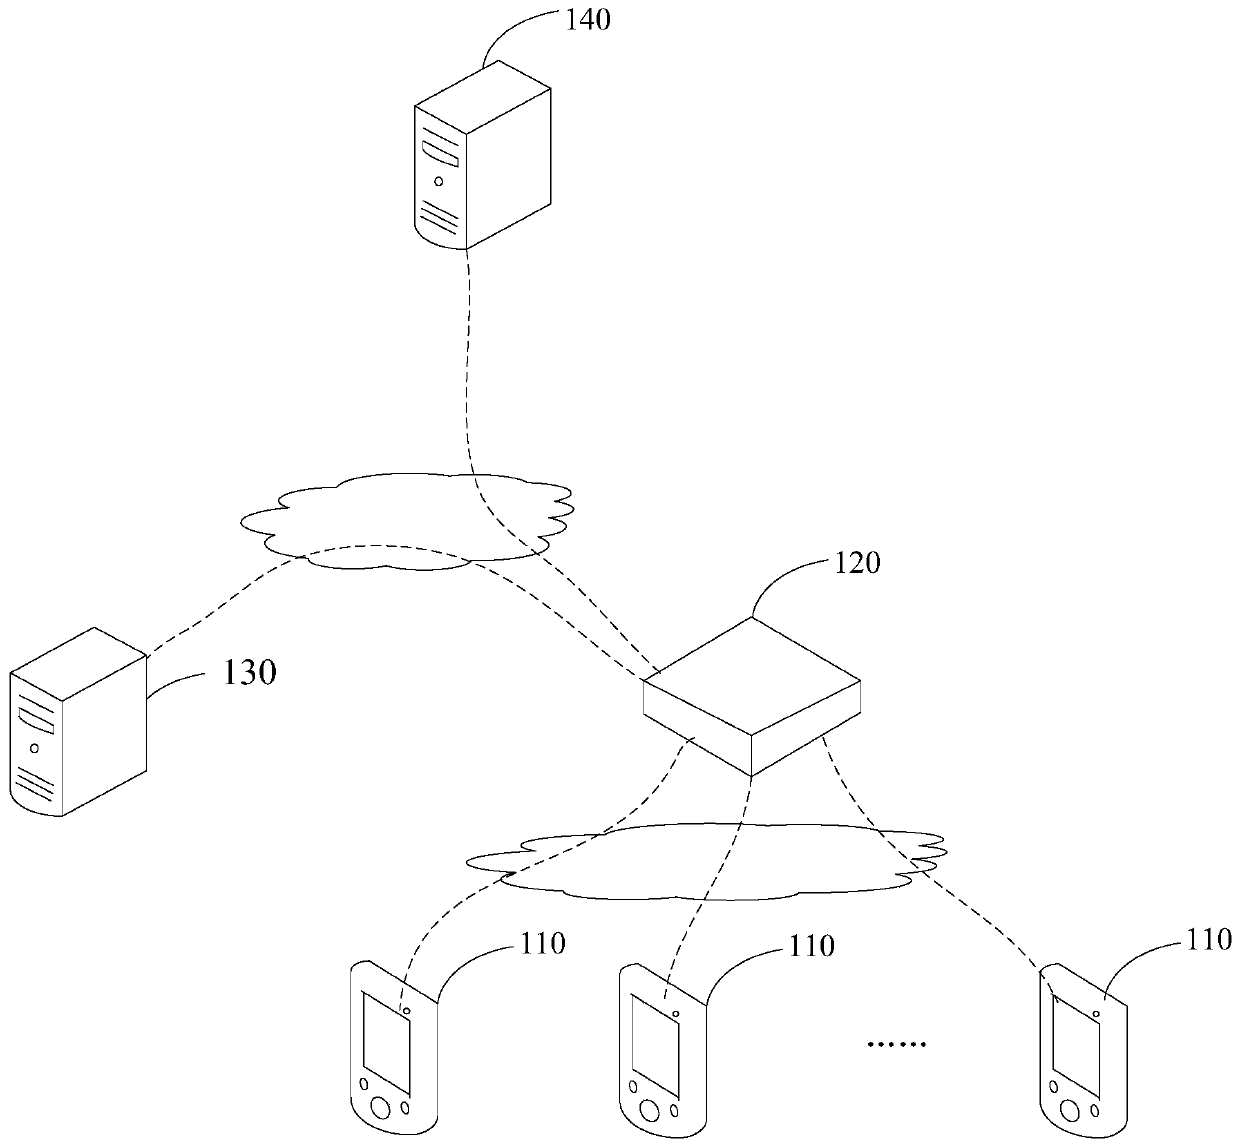 A wireless network sharing method, device and system